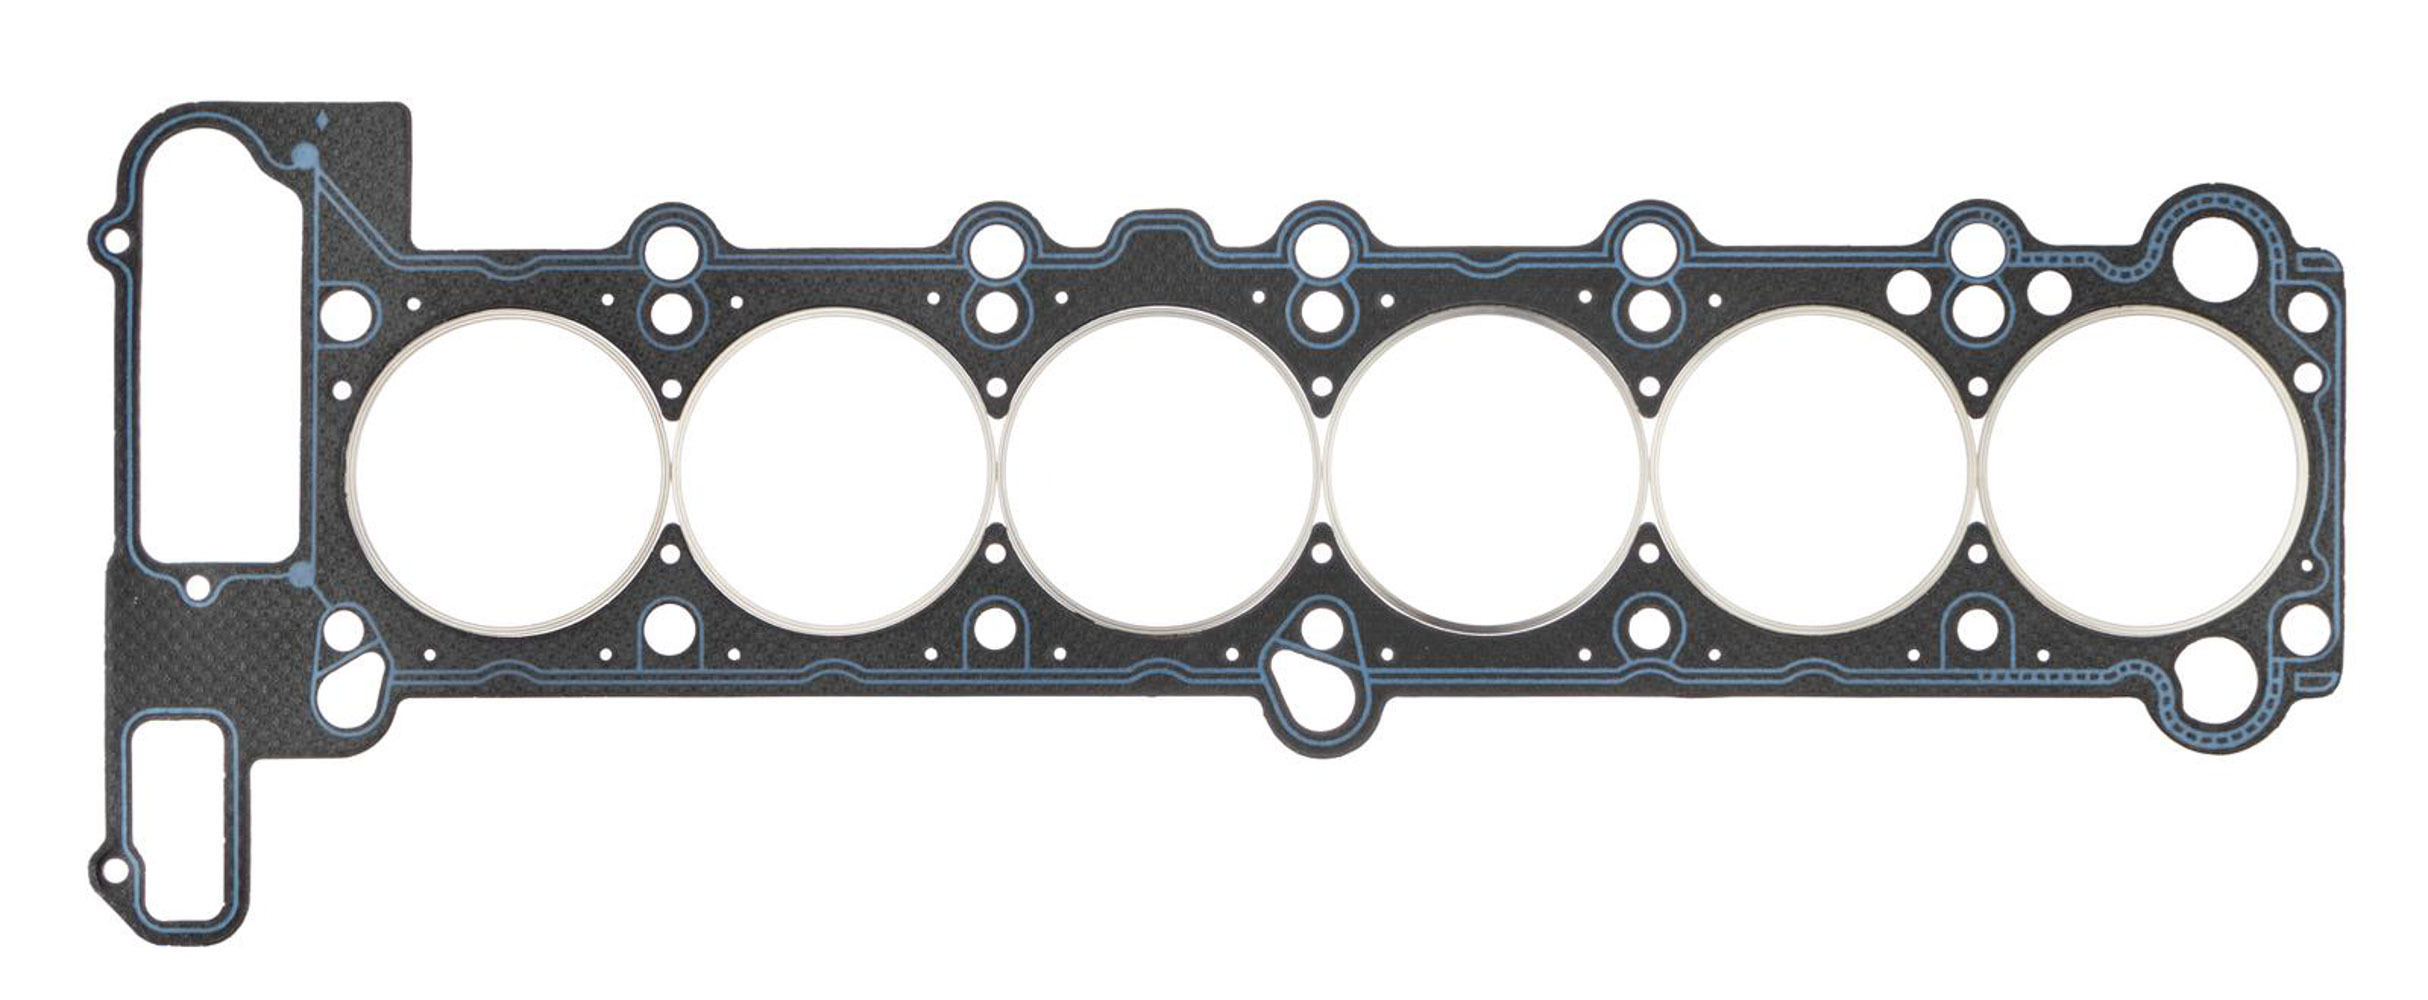 SCE Gaskets CR330014 - Cylinder Head Gasket, Vulcan Cut Ring, 87.00 mm Bore, 2.00 mm Compression Thickness, Steel Core Laminate, BMW Inline-6, Each